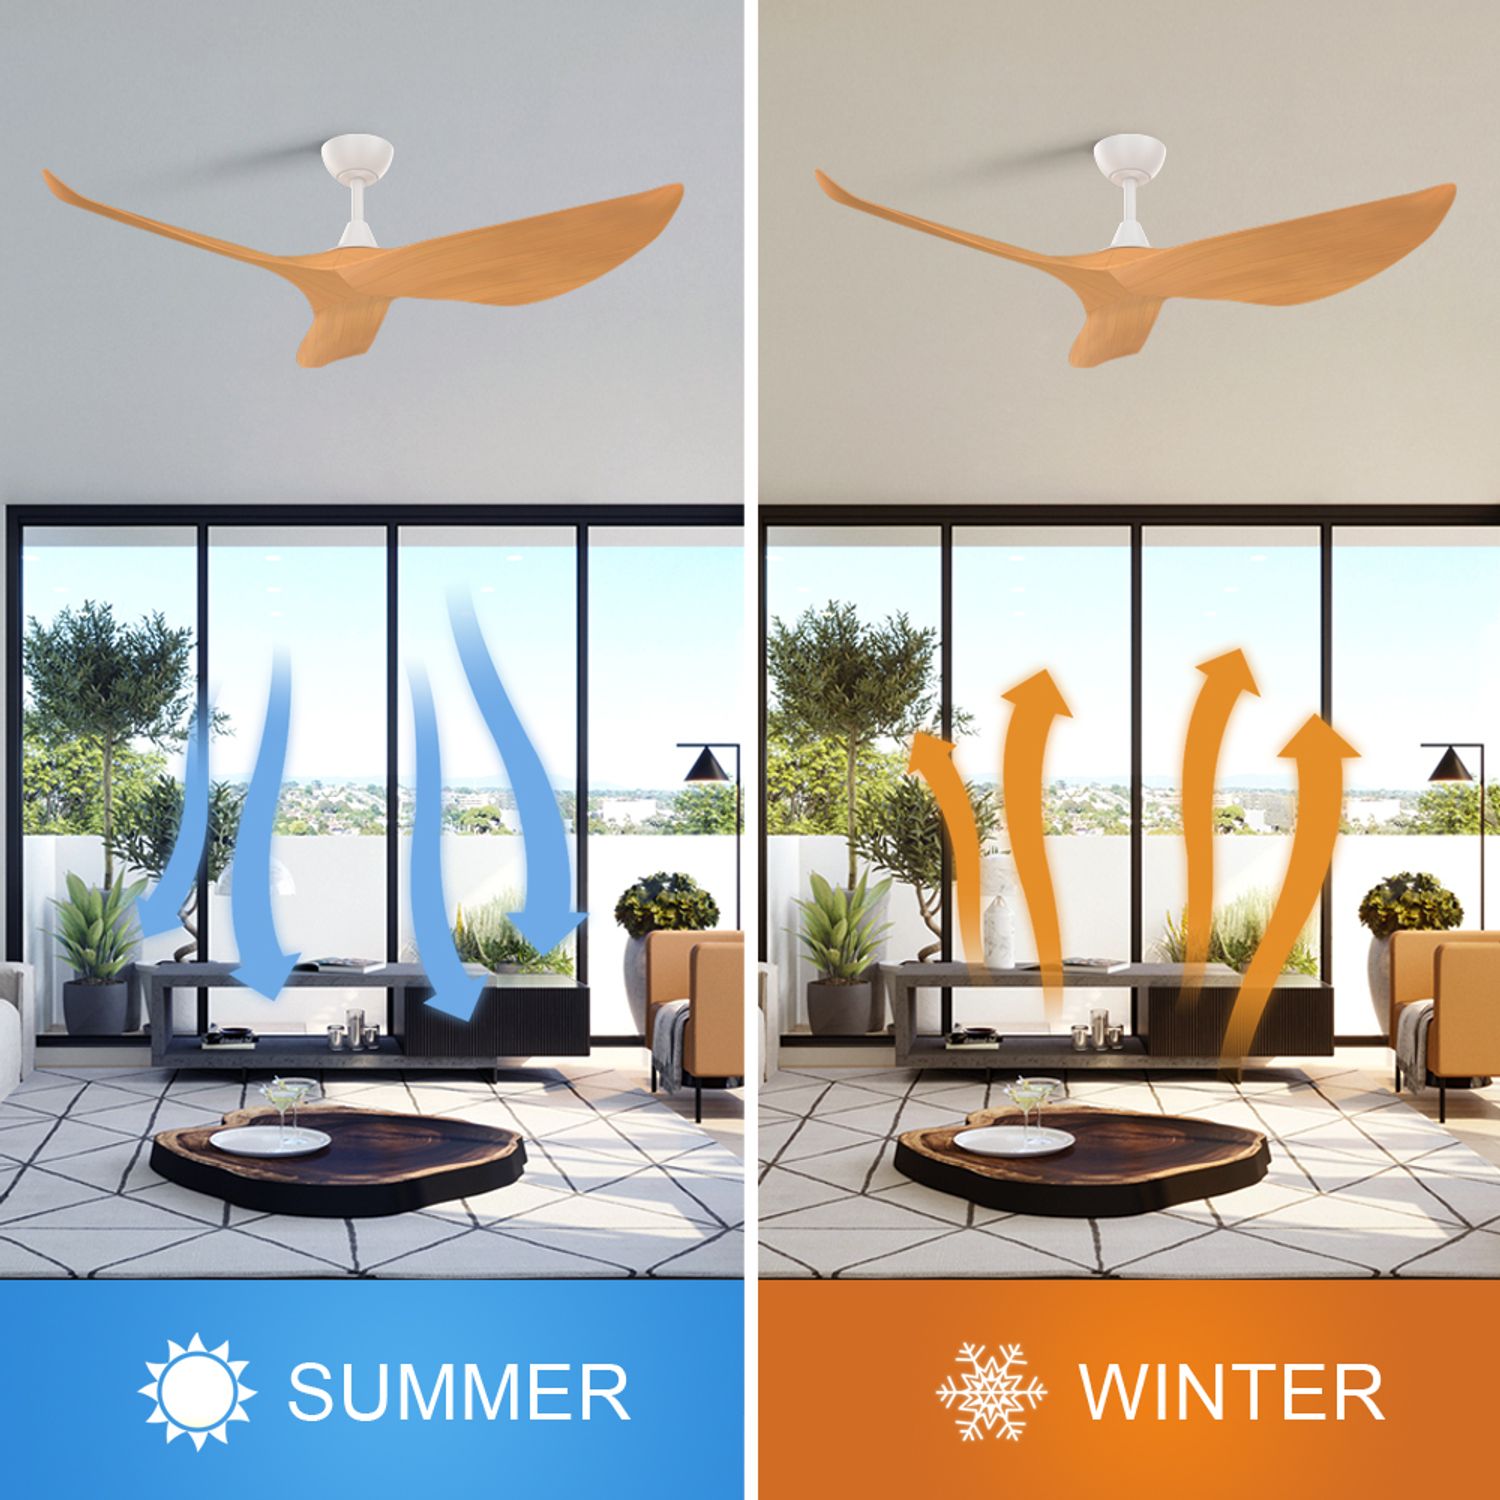 Low Profile Solid Wood Ceiling Fan Reversible function in summer and winter